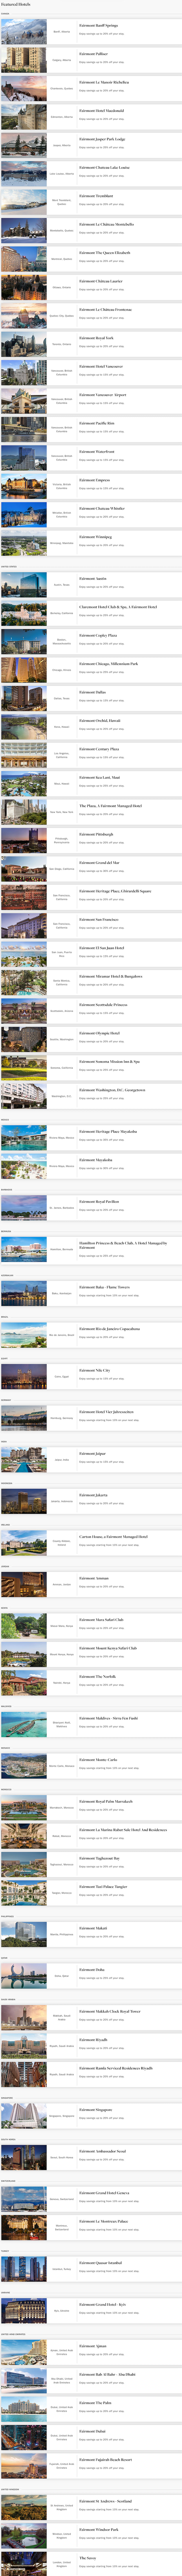 Fairmont hotels featured for offer